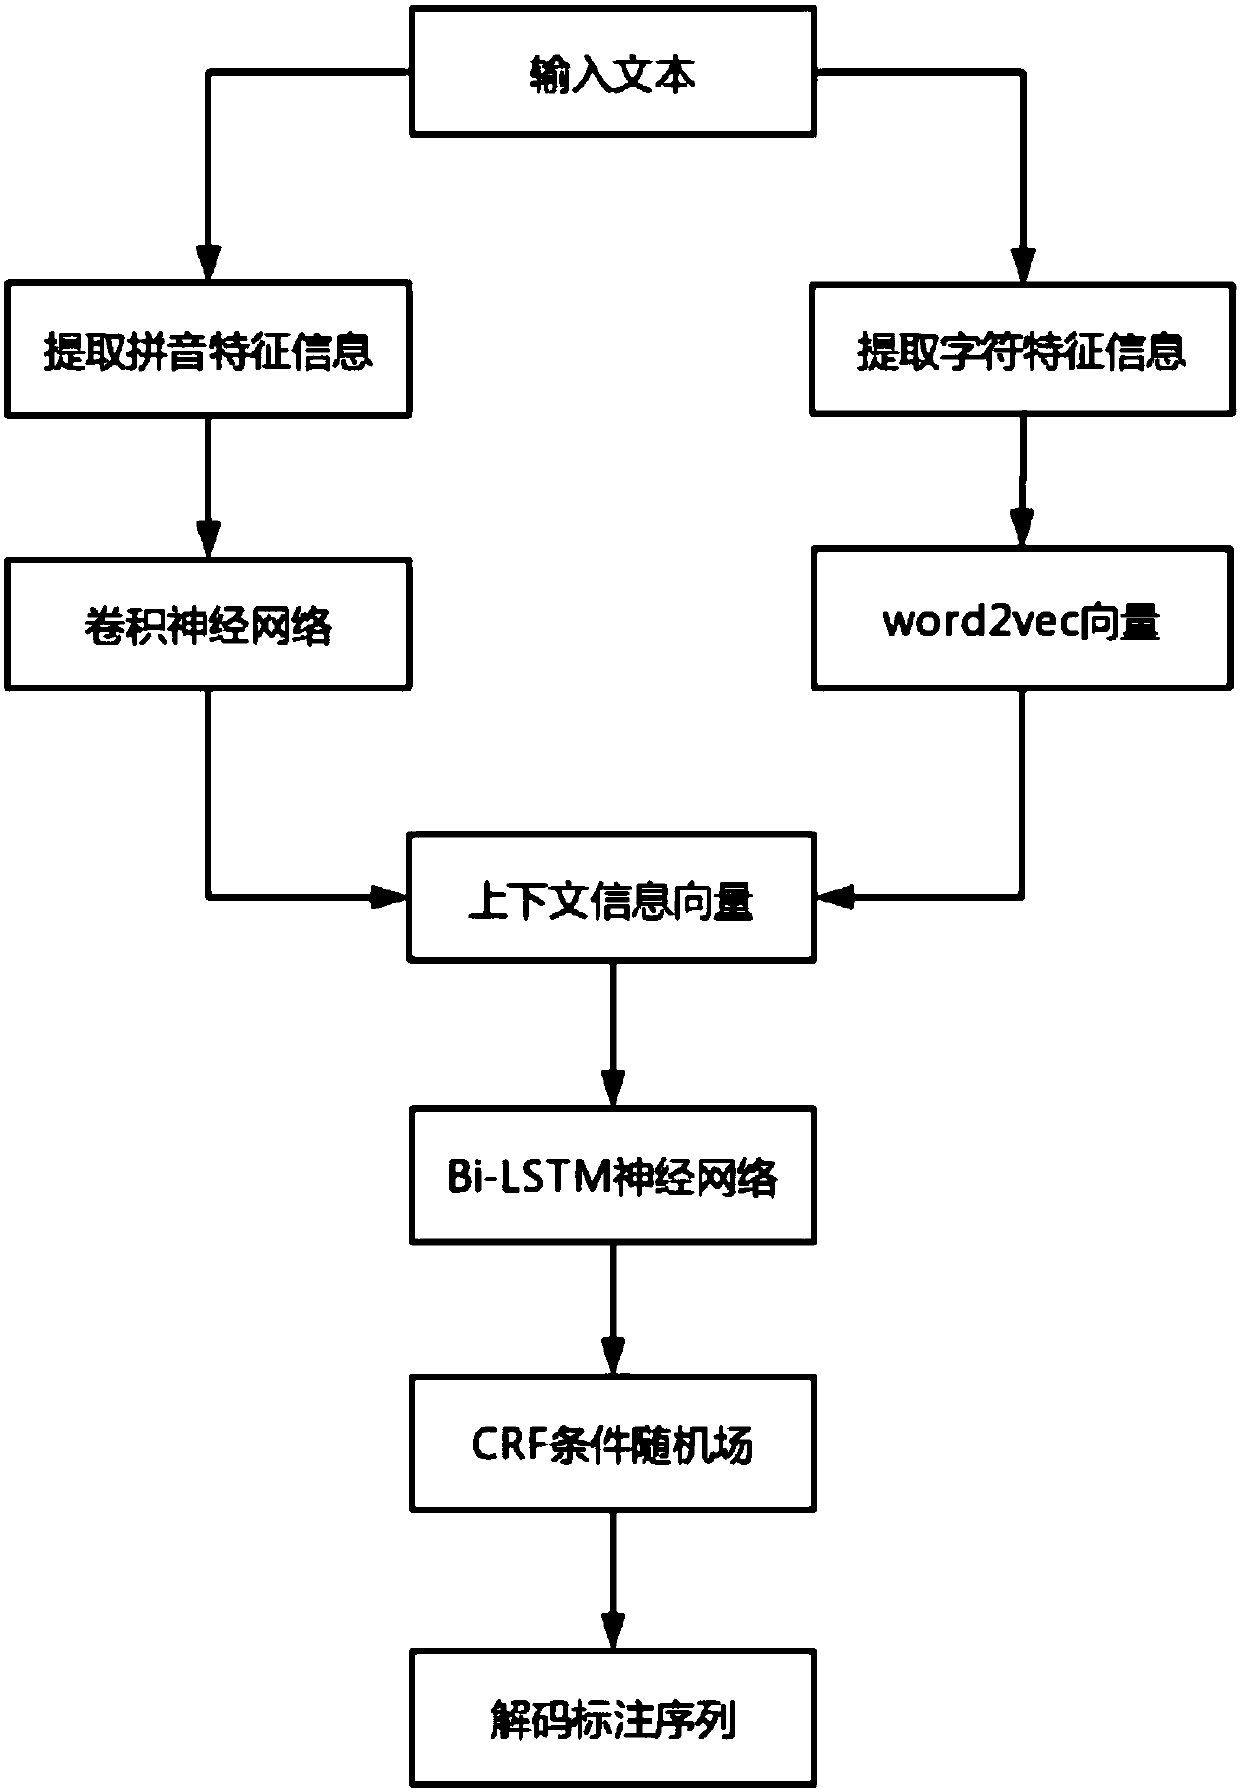 Chinese word segmentation method based on two-way LSTM, CNN and CRF